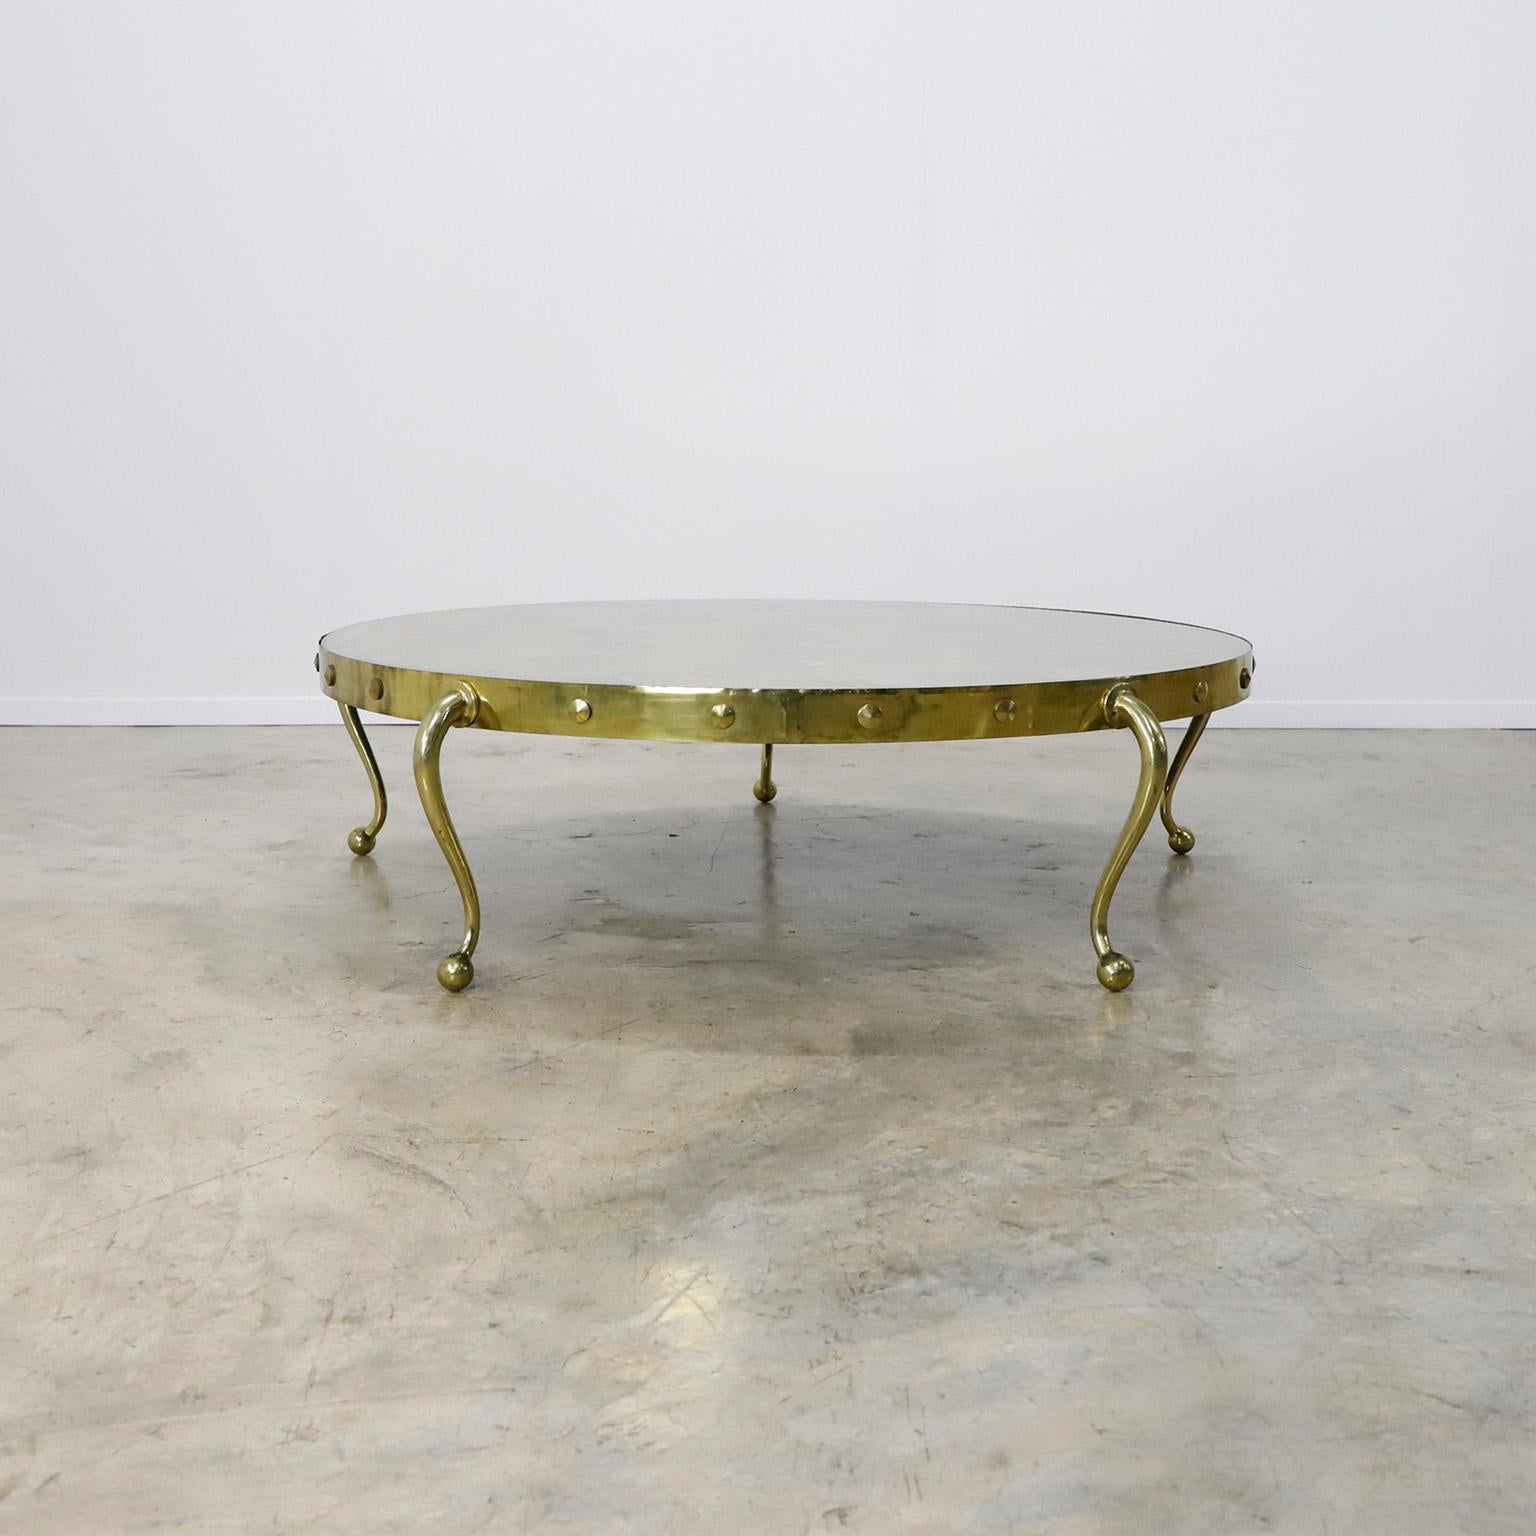 Circa 1960. We offer this cocktail table designed by Arturo Pani, the table are made in solid bronze whit spectacular legs design.